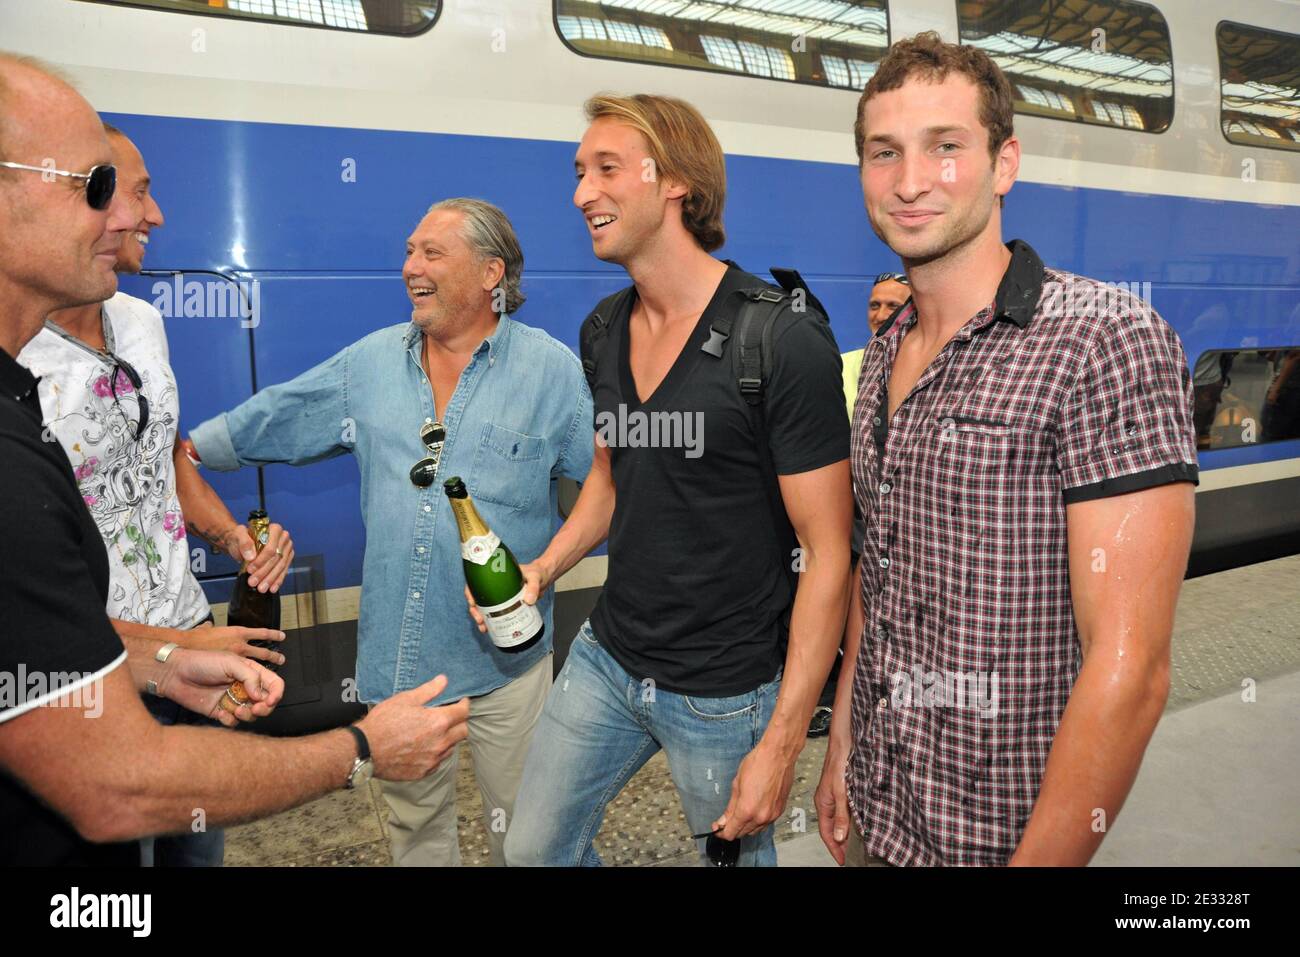 (From L to R) French swimmers and European medalists Fabien Gilot and William Meynard are welcomed by relatives at Marseille Saint-Charles train station in Marseille, France on August 17, 2010 as they arrive from the European swimming championships in Budapest. France won 23 medals including 8 gold, 8 silver and 7 bronze and ranked first, in front of Russia and Germany. Photo by Jeremy Charriau/ABACAPRESS.COM Stock Photo